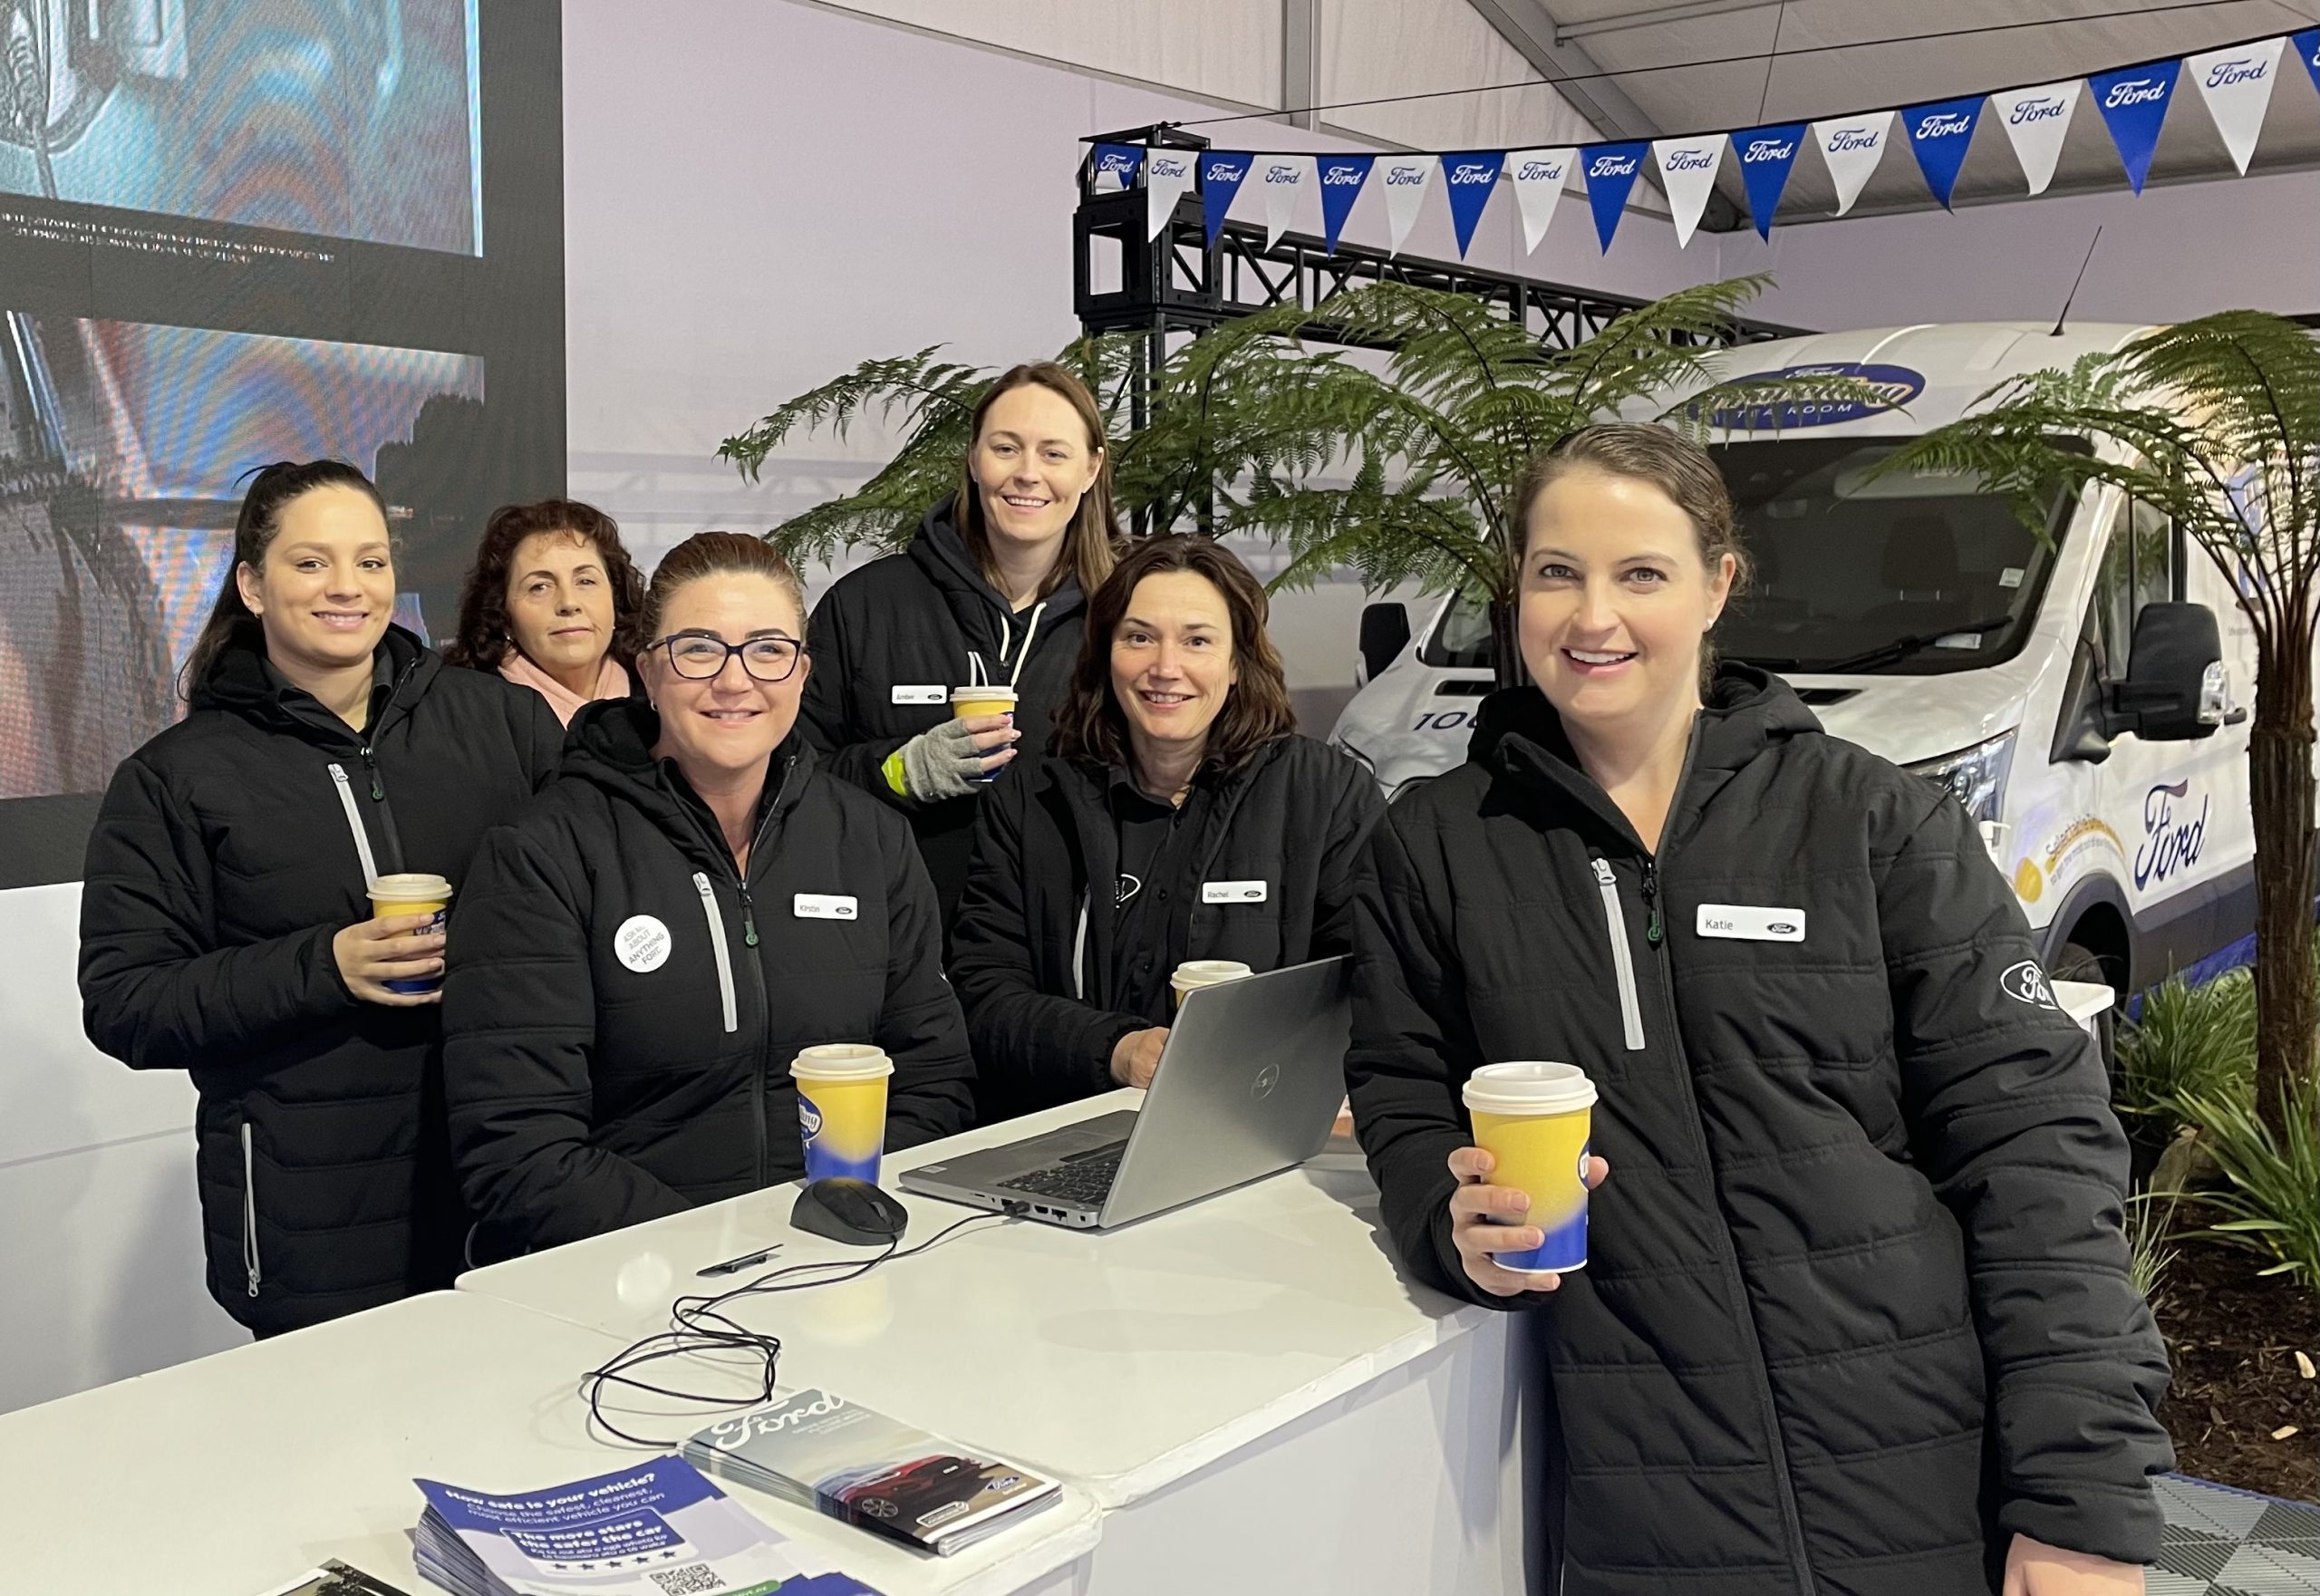 Ford team ready with coffee and answers to your questions at Fieldays.